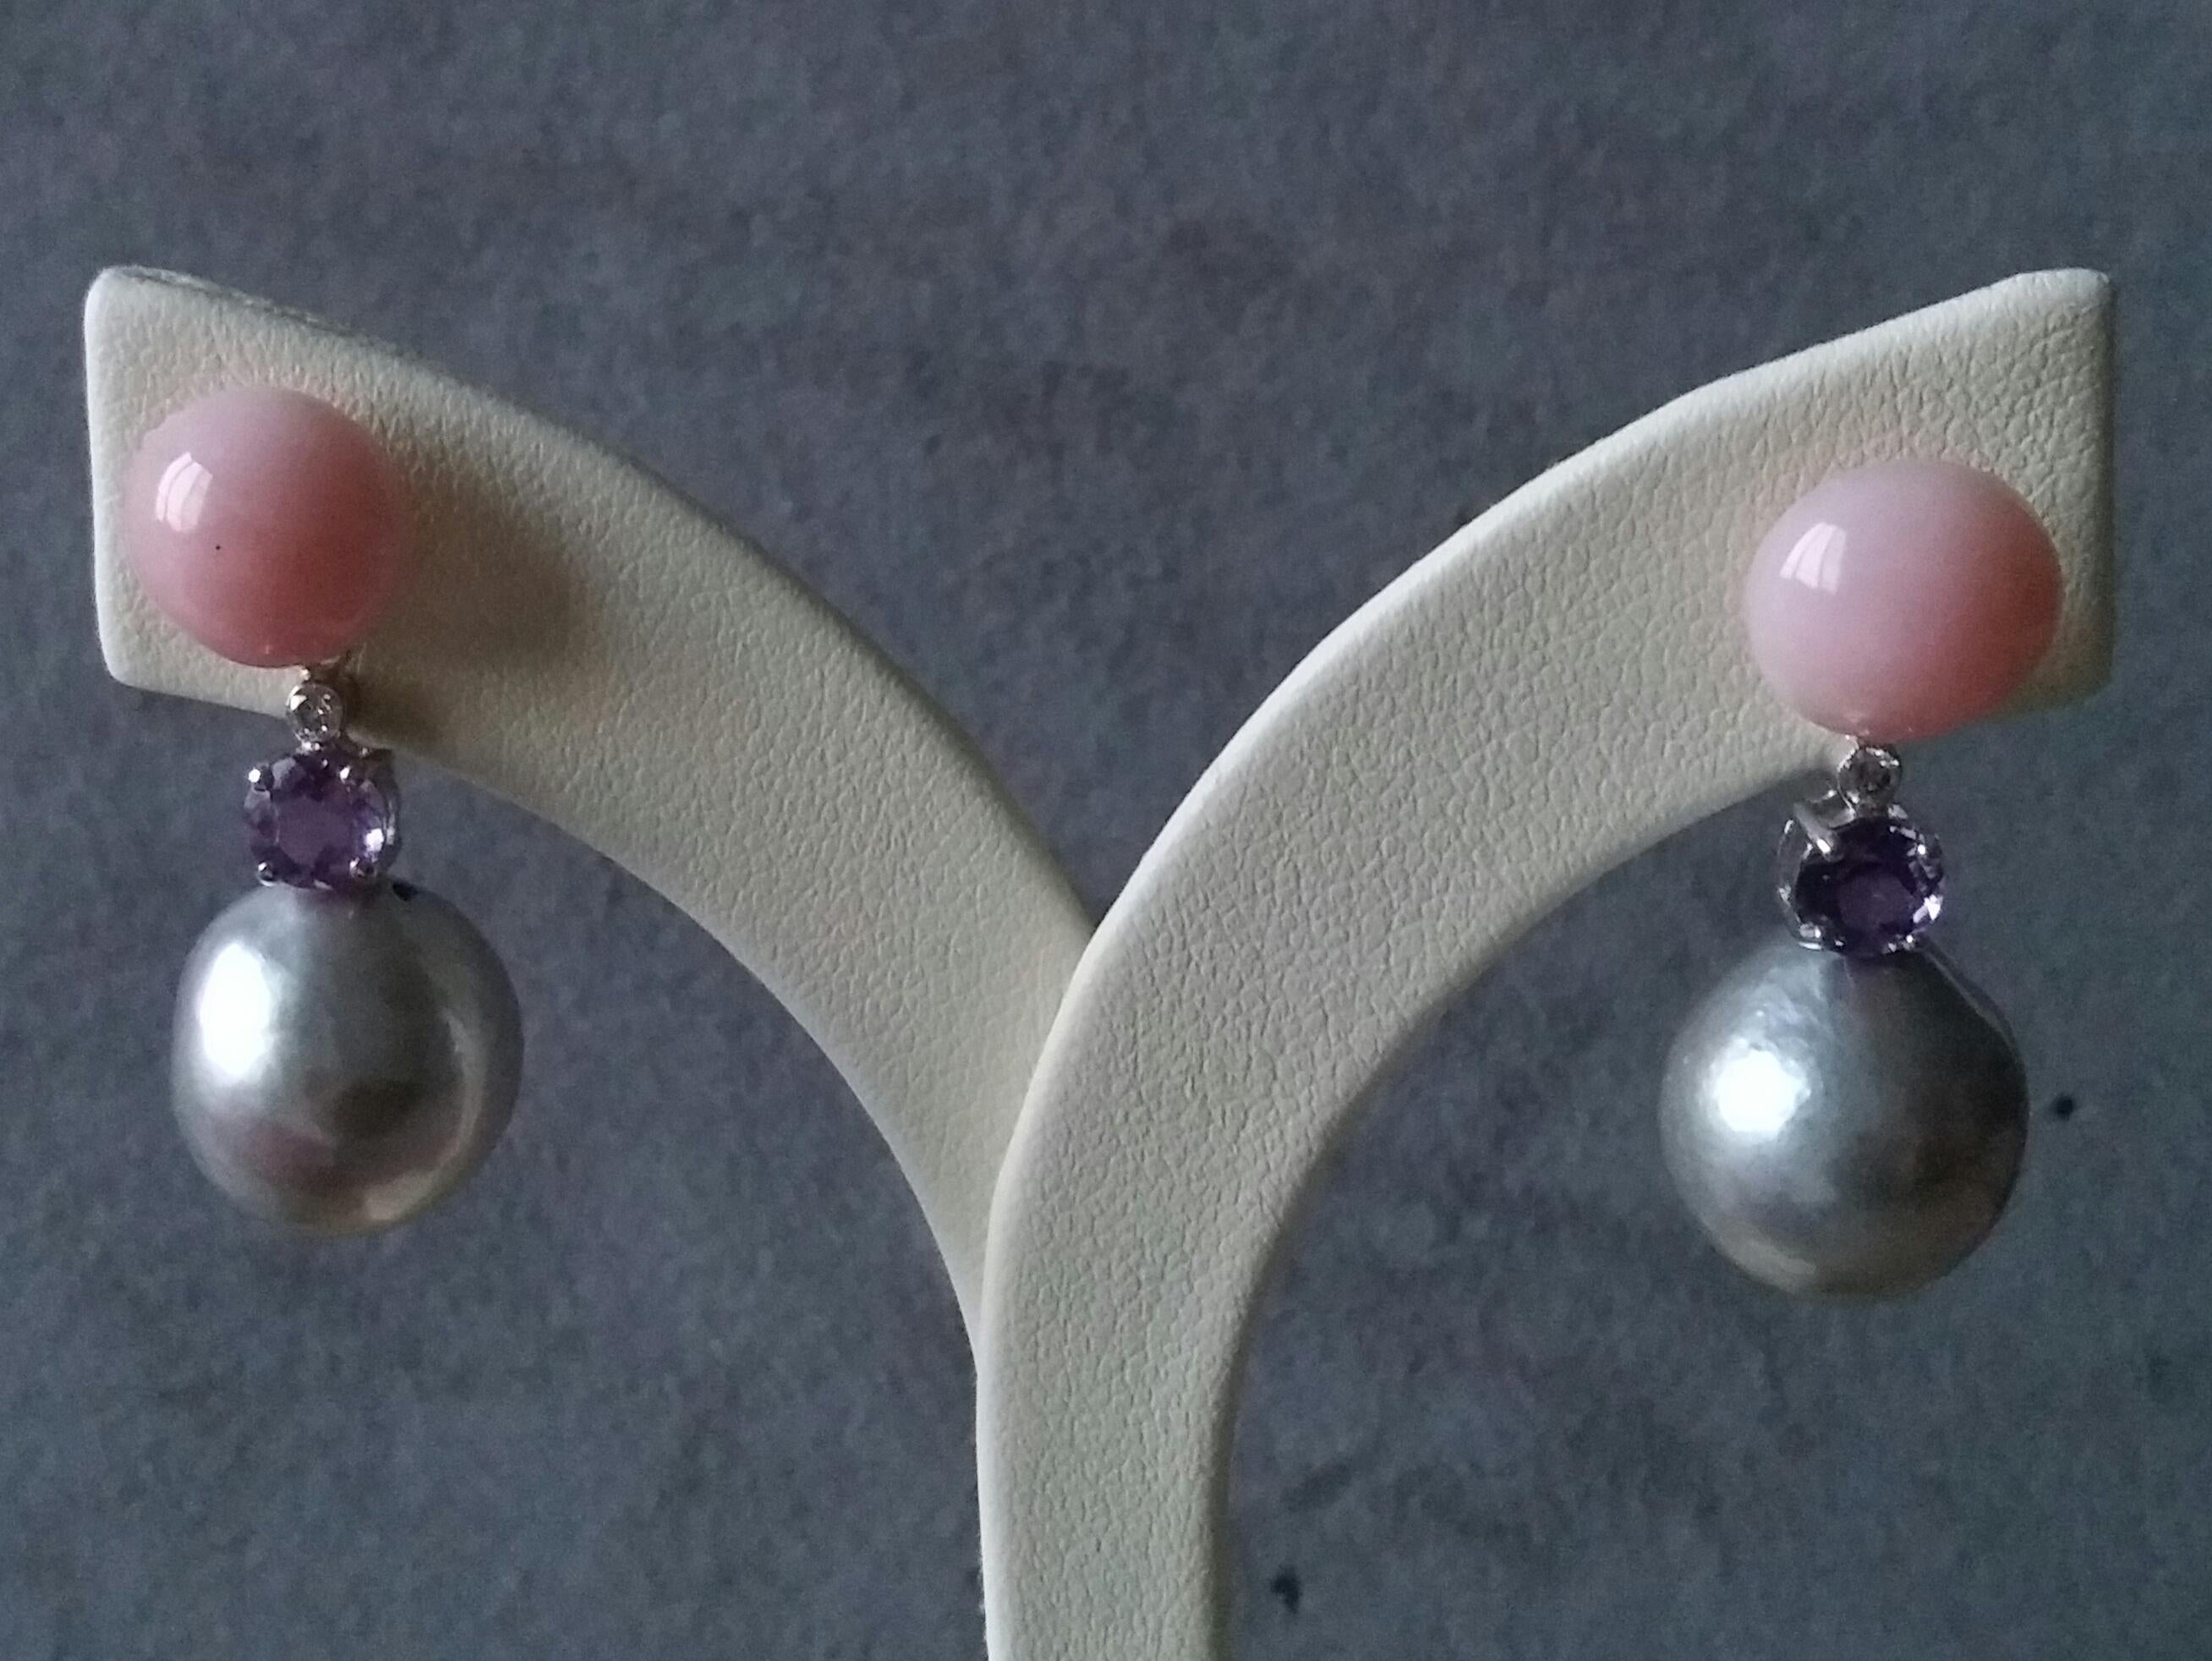 The tops are 2 round 10 mm diameter pink opal buttons,middle parts have 2 small full cut diamonds and 2 round cut amethysts, the bottom parts there are 2 baroque grey pearls about 13 mm in diameter
Total Dimensions
Length 31 mm
Width 13 mm
Weight  8